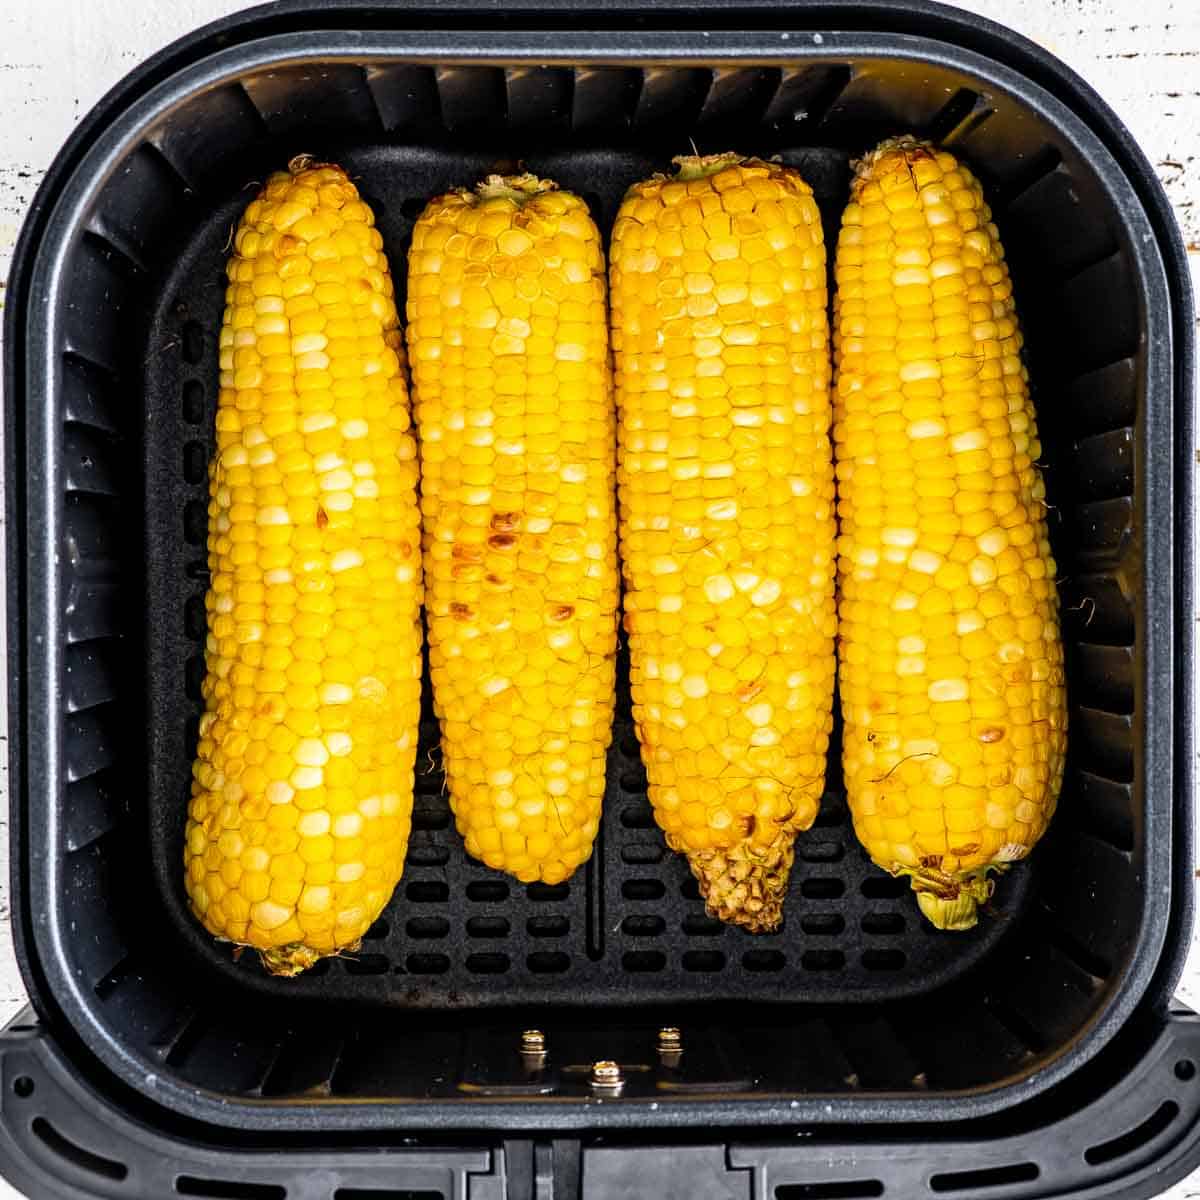 cooked corn on the cob in an air fryer basket.